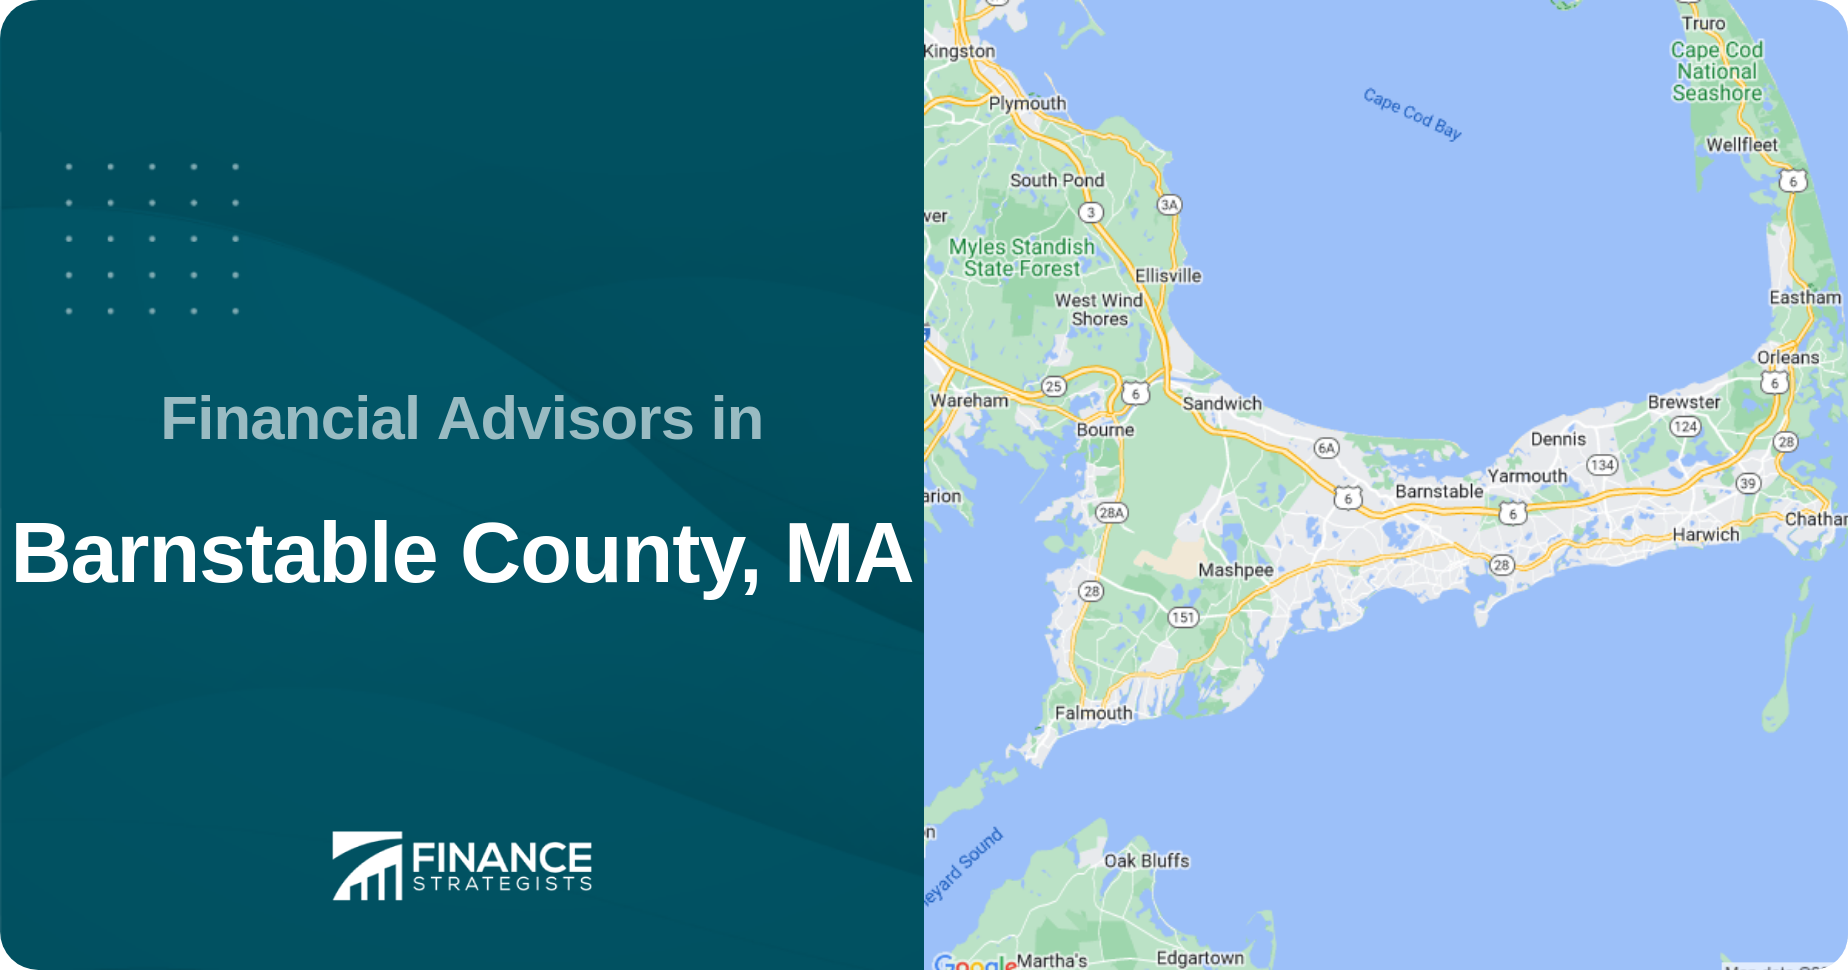 Financial Advisors in Barnstable County, MA